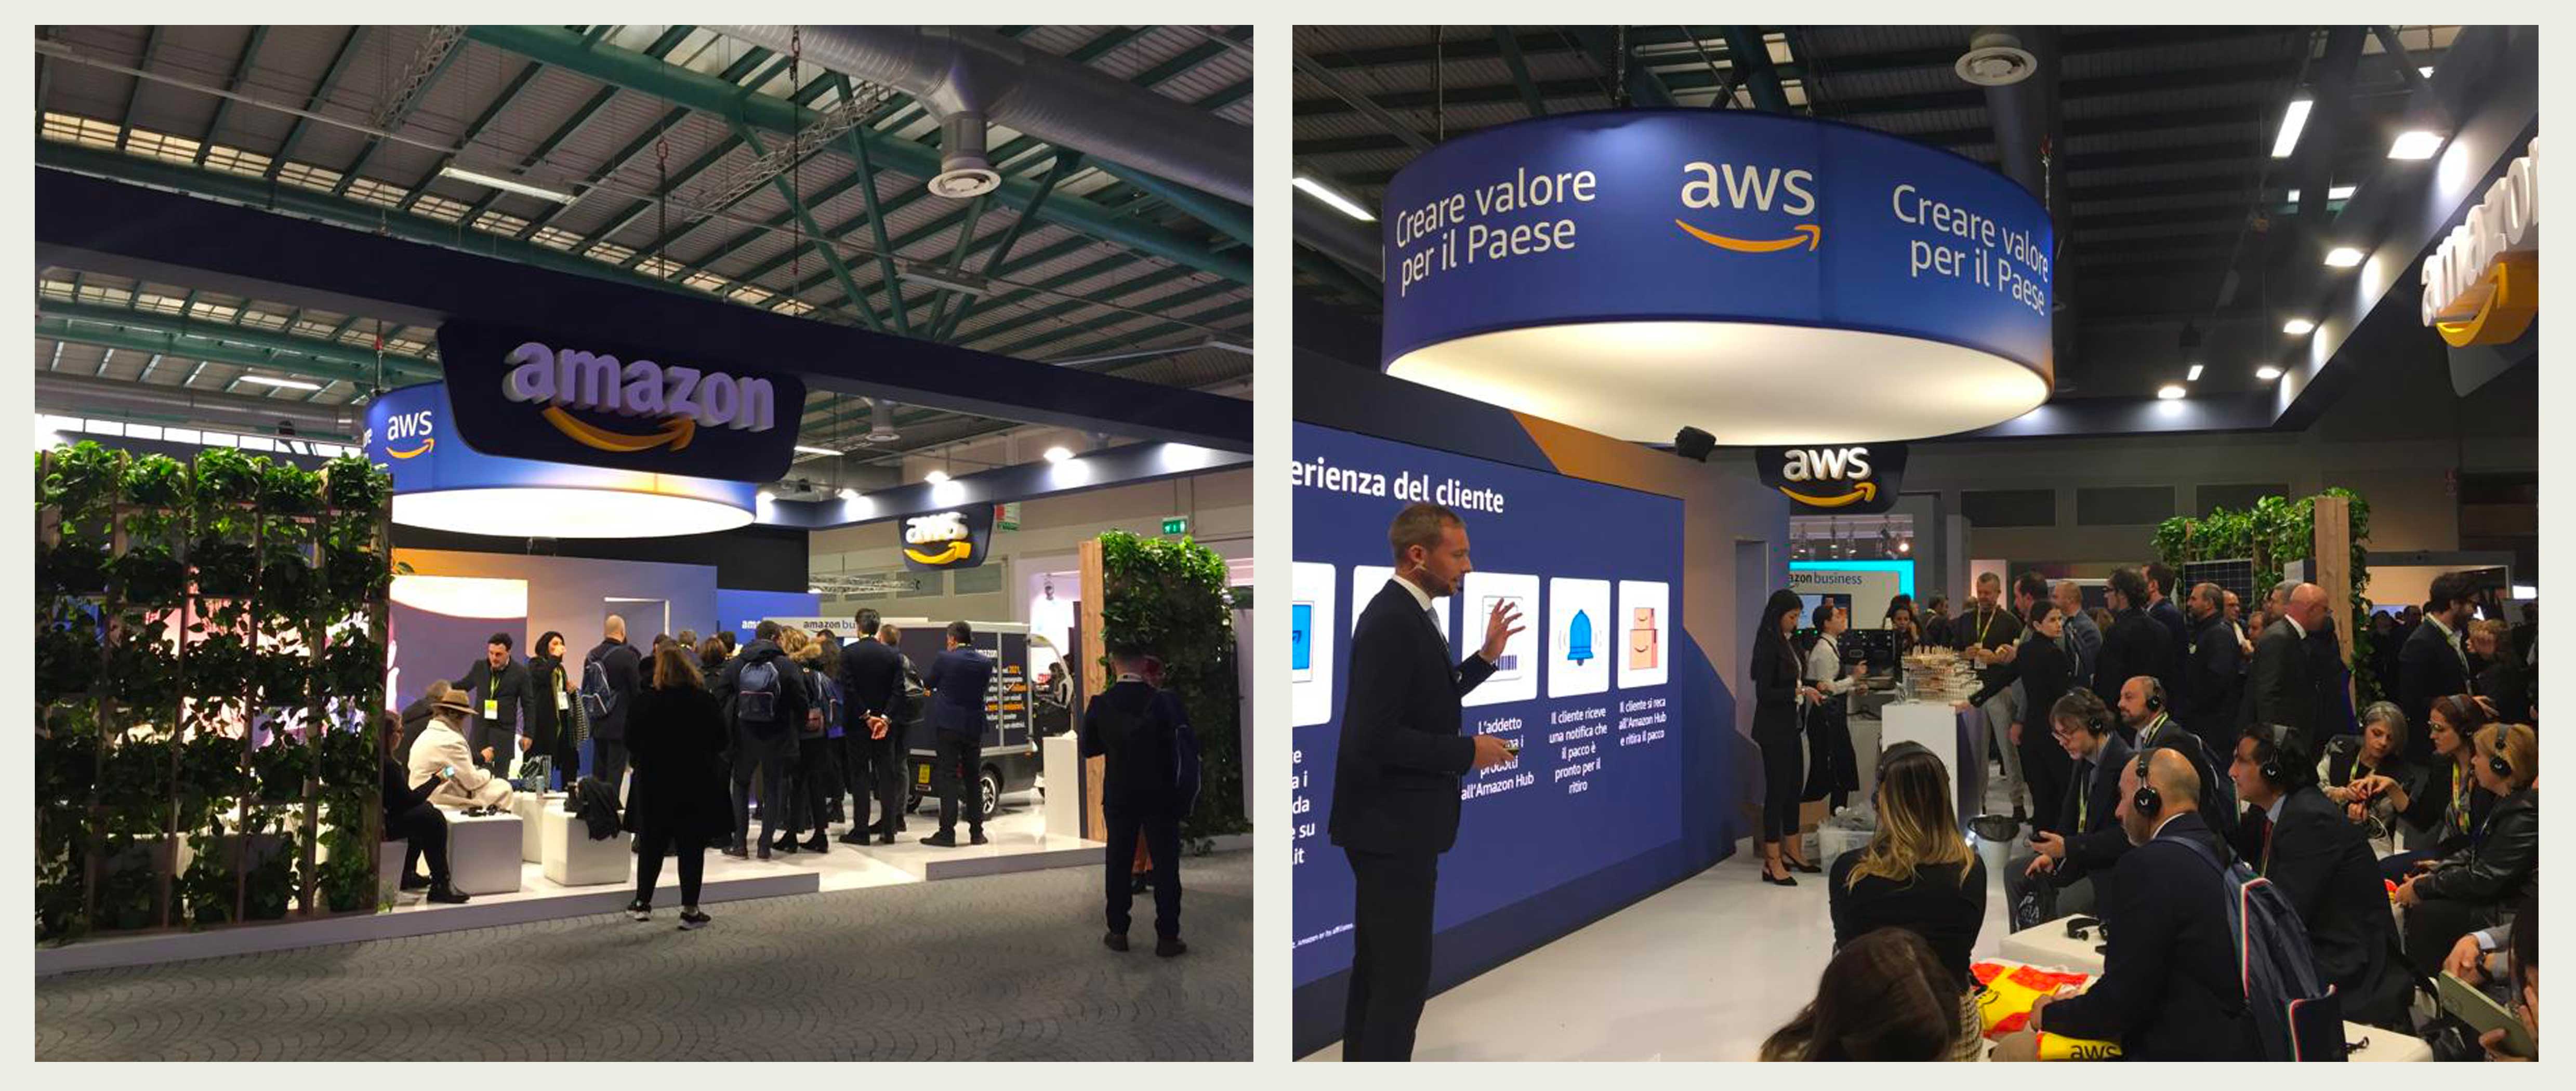 The Amazon & AWS stand designed for ANCI 2022